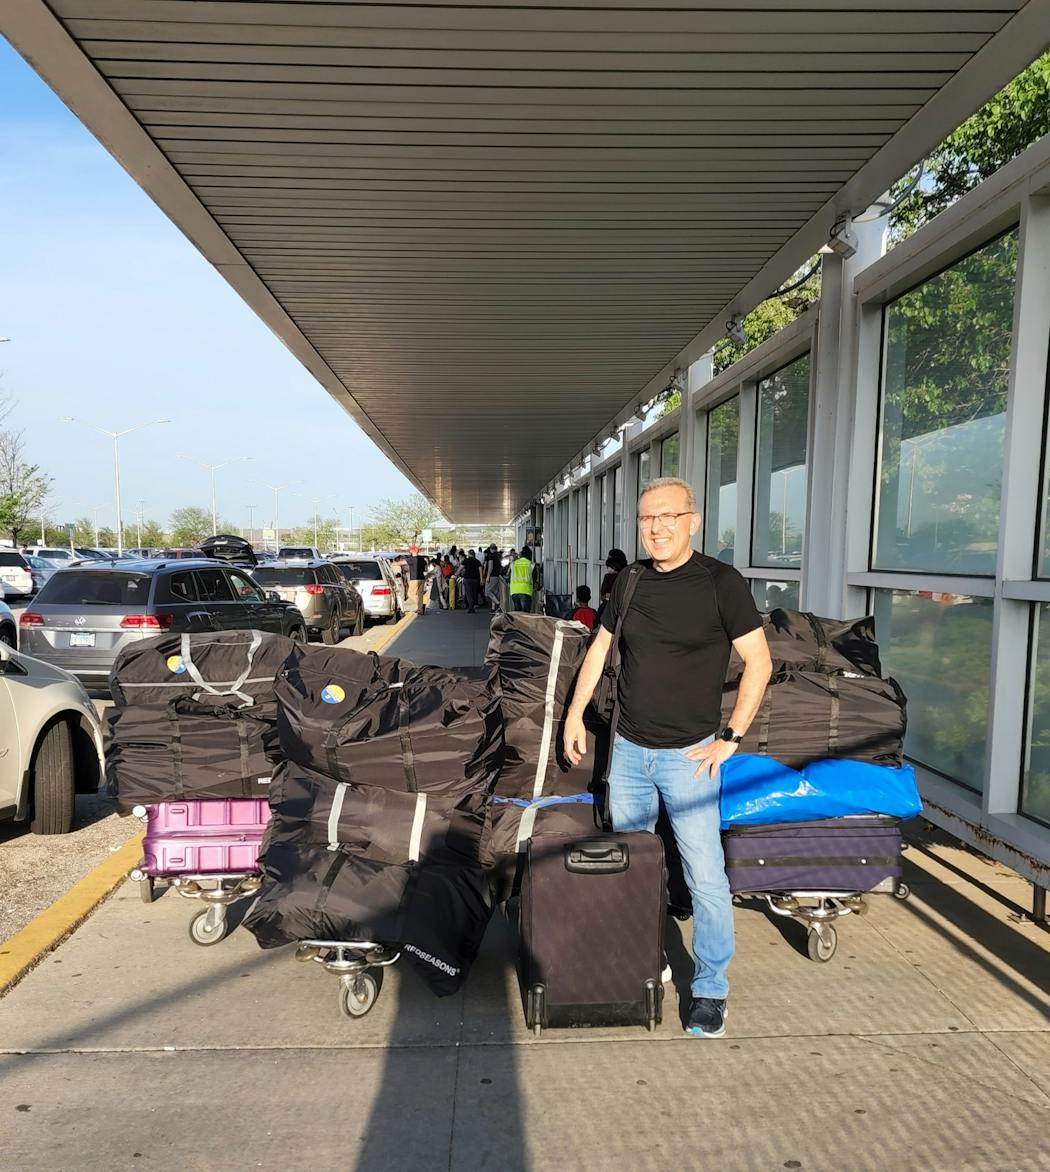 Much of the donated equipment is packed into suitcases and duffel bags — and then brought on passenger flights to the Polish cities of Warsaw and Krakow. From there, volunteers rely on personal contacts to drive the supplies across the Ukraine border. One volunteer, Roman Kovbasnyk, recently completed a whirlwind trip to Europe in which he delivered 14 suitcases of tactical gear.